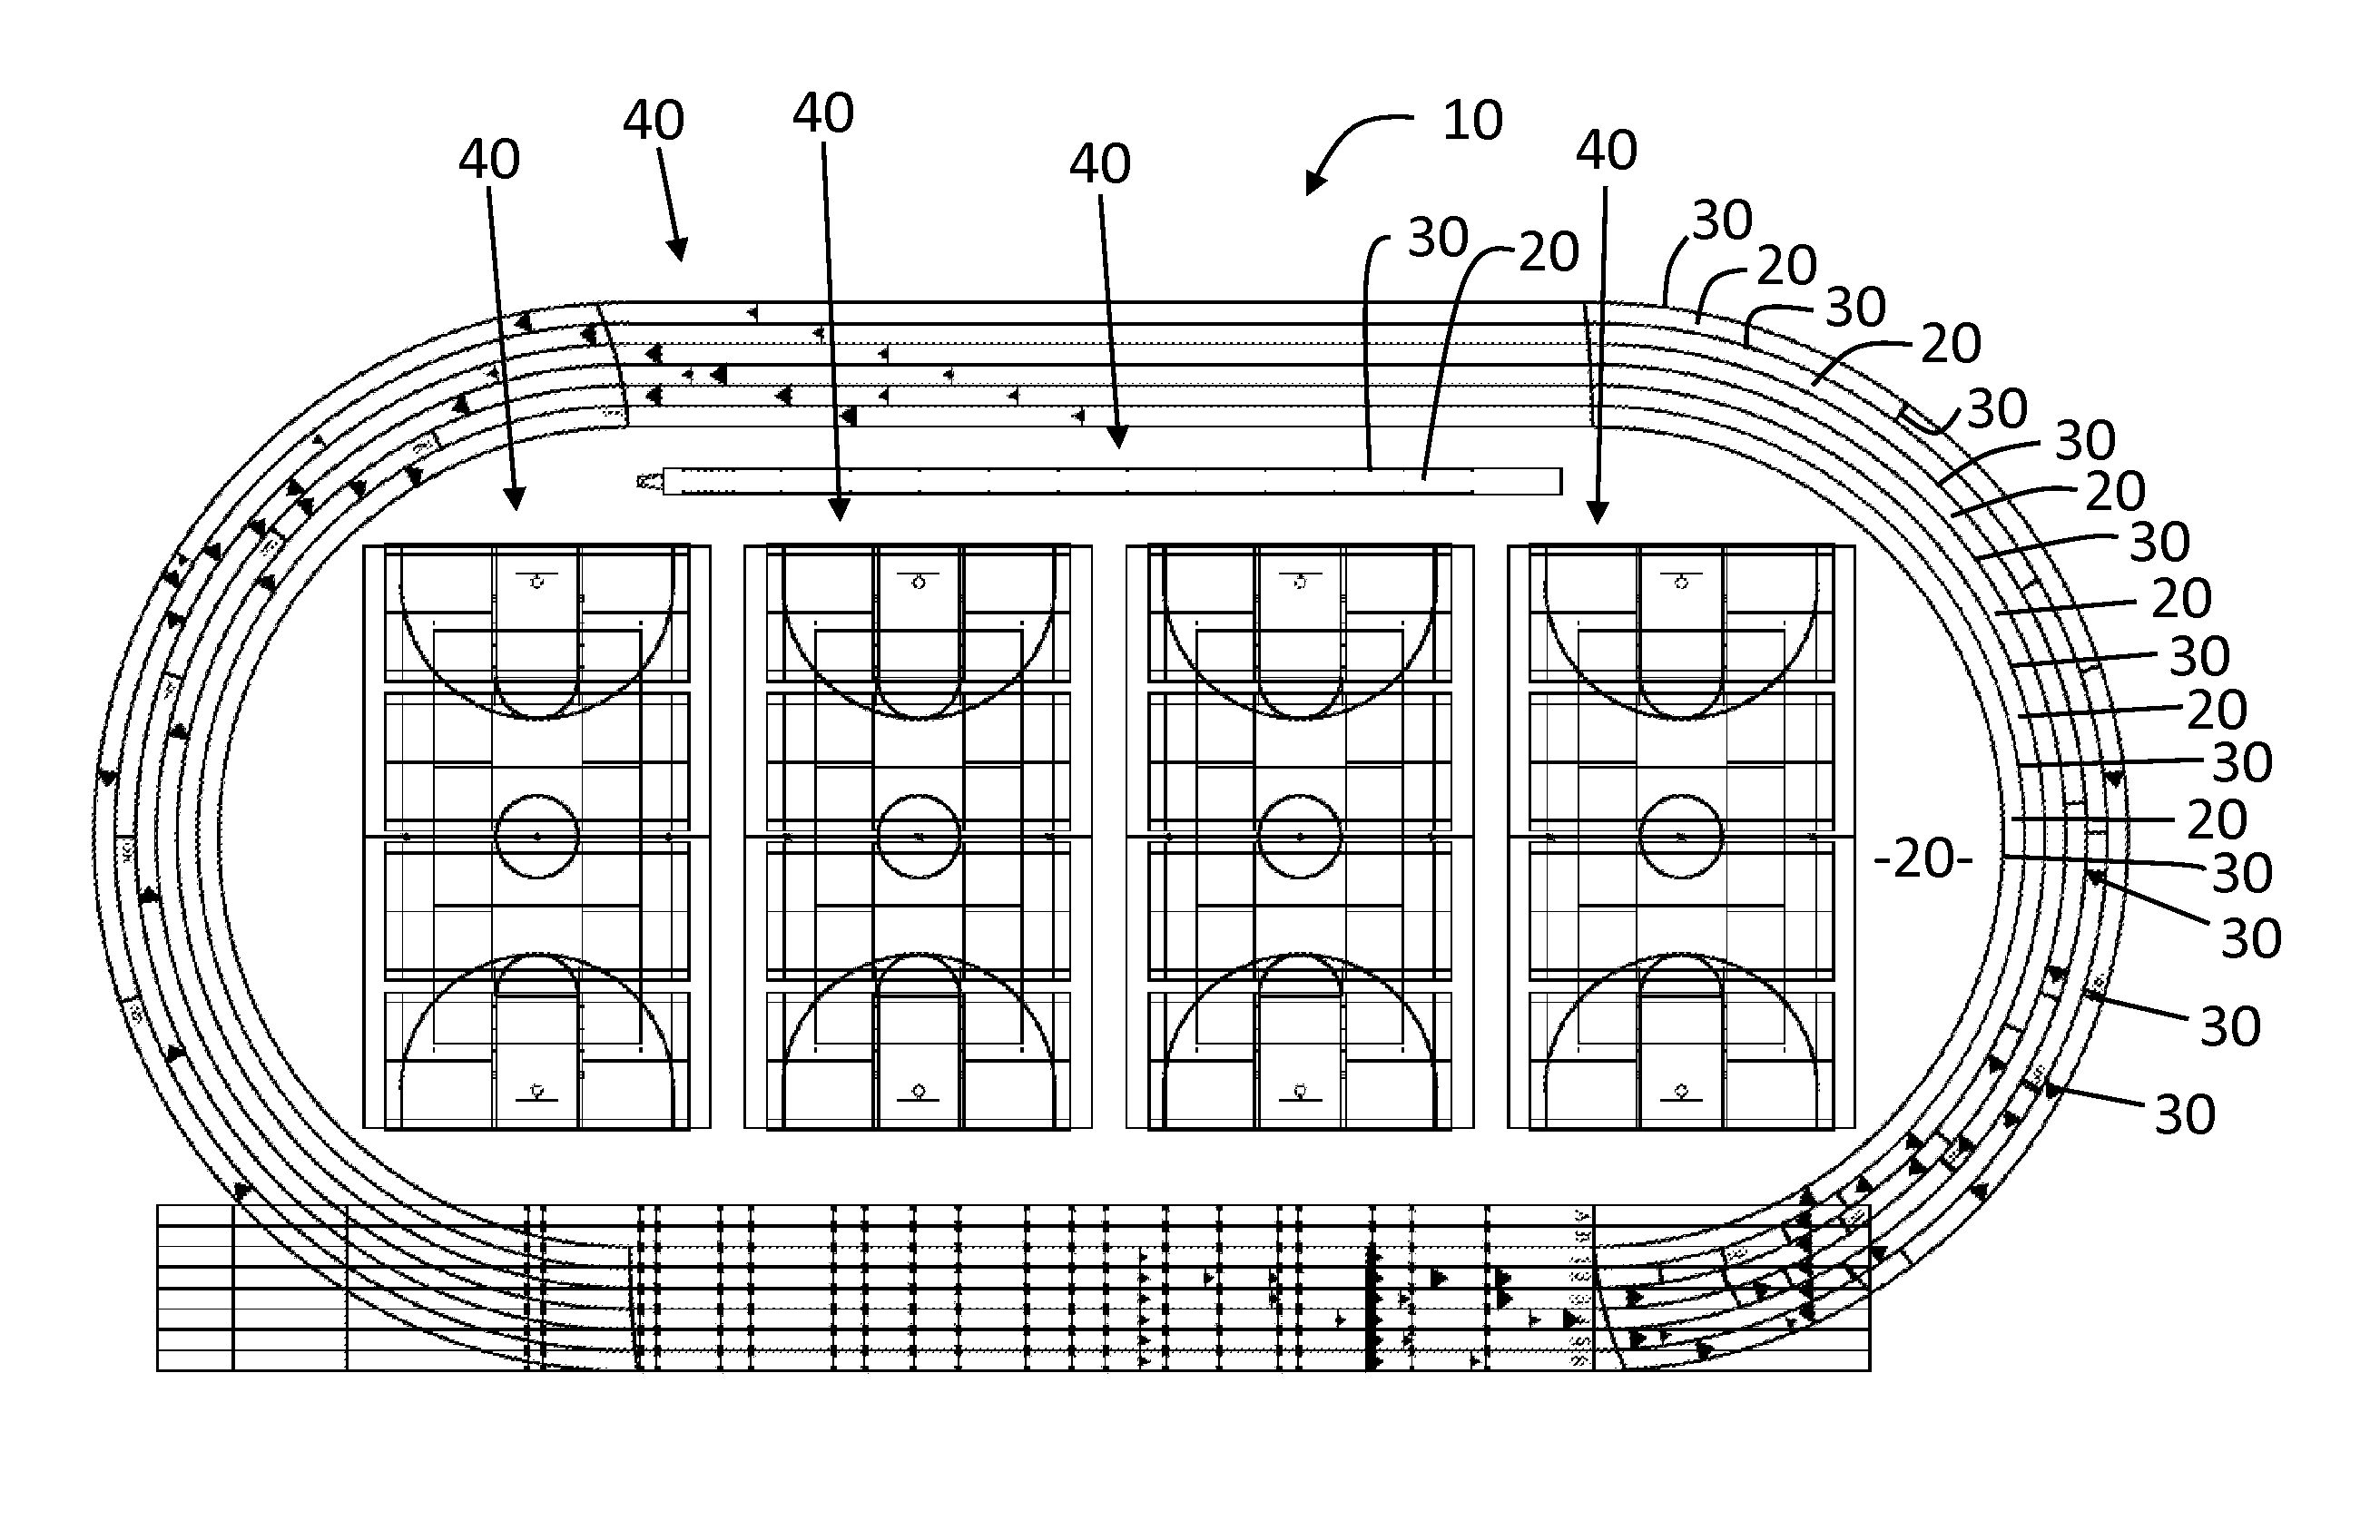 In-laid athletic floor and method of installing the same